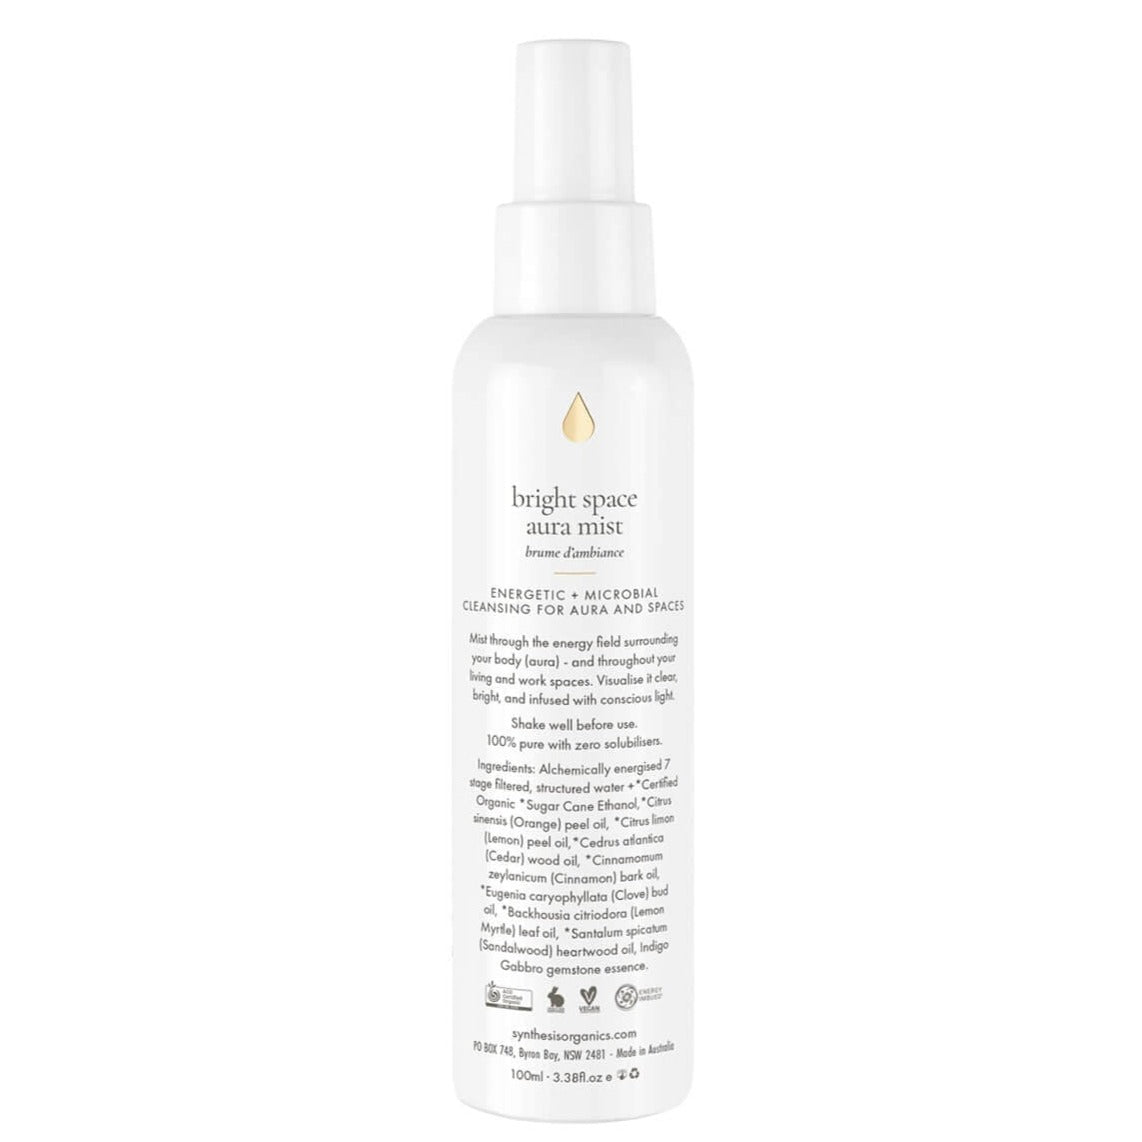 Bright Space Aura Mist Other Synthesis Organics